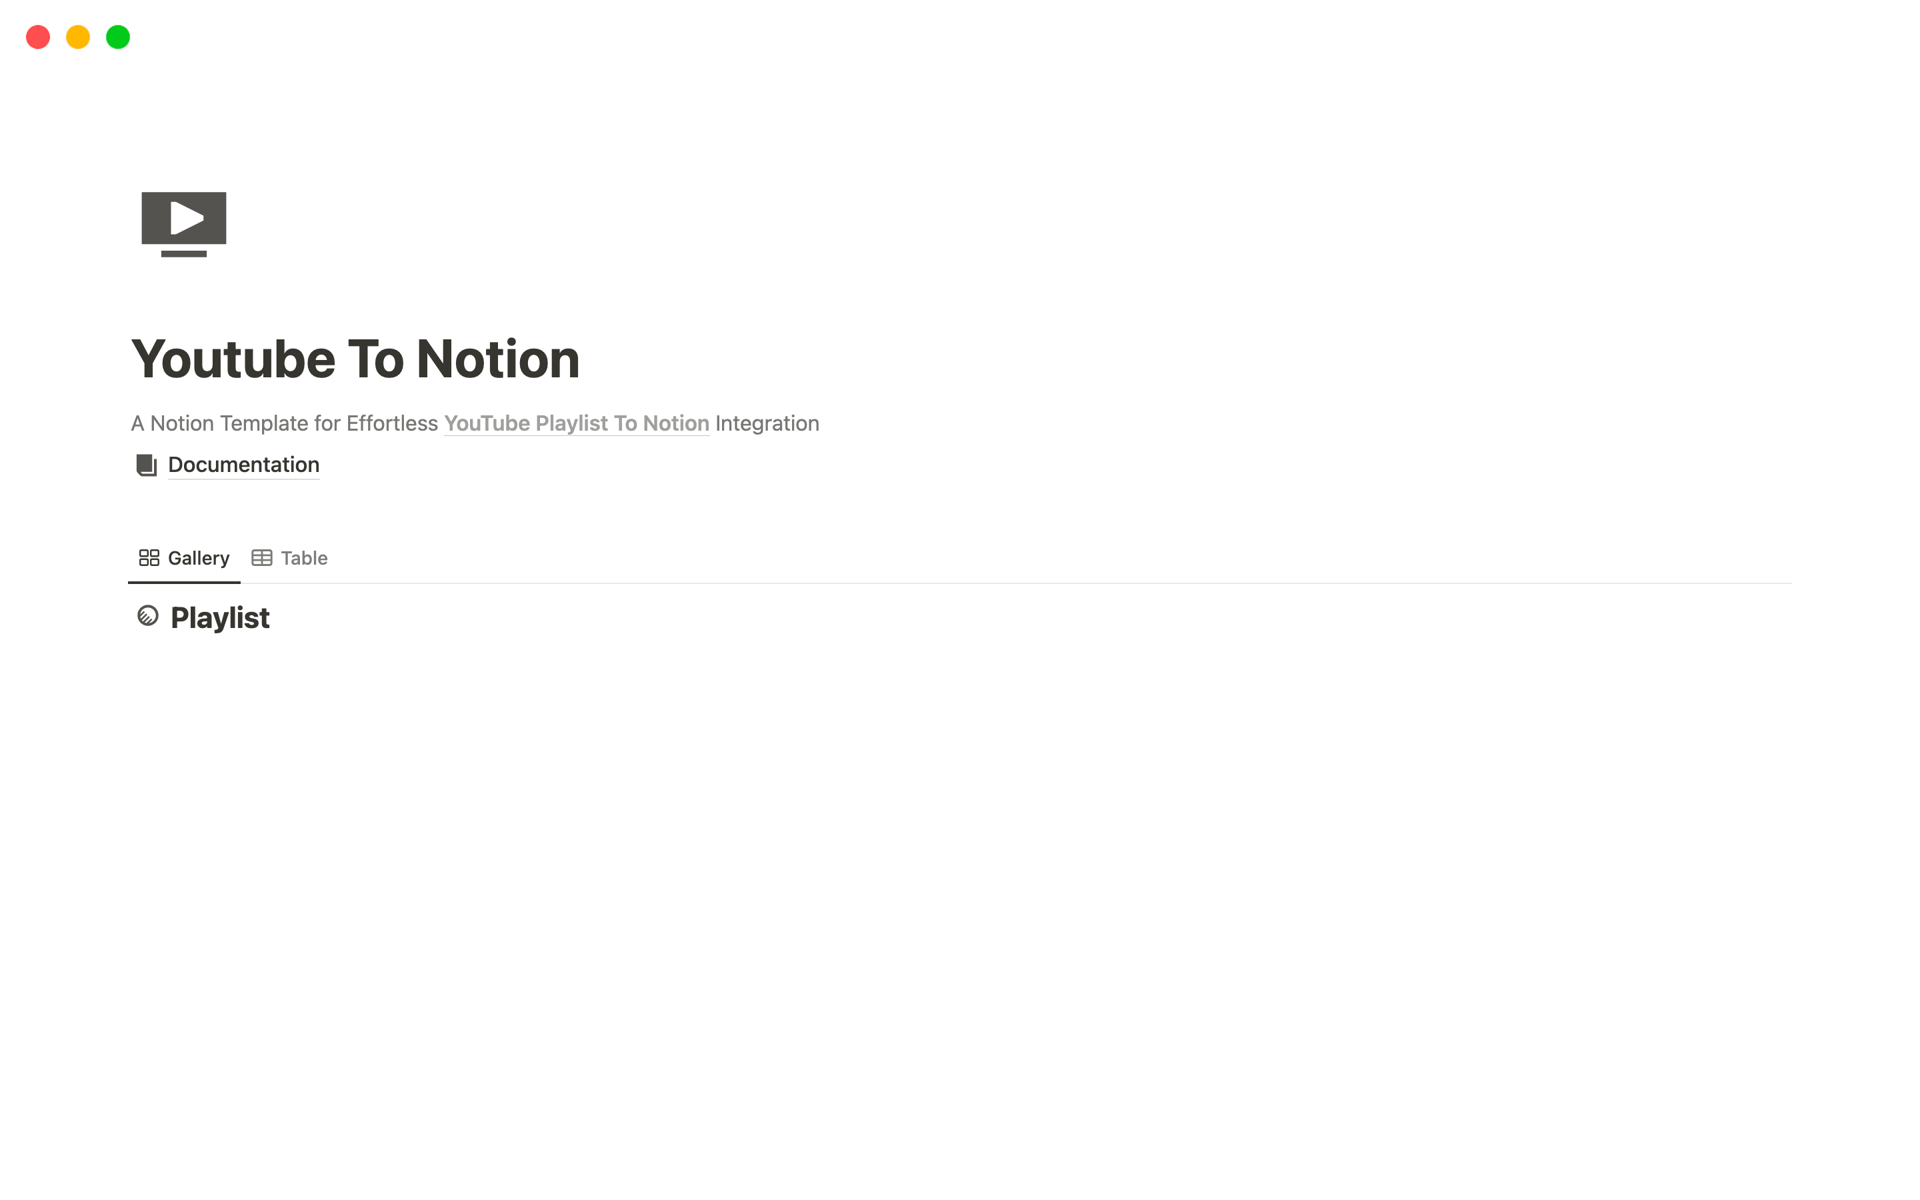 A Notion Template for Effortless YouTube Playlist To Notion Integration